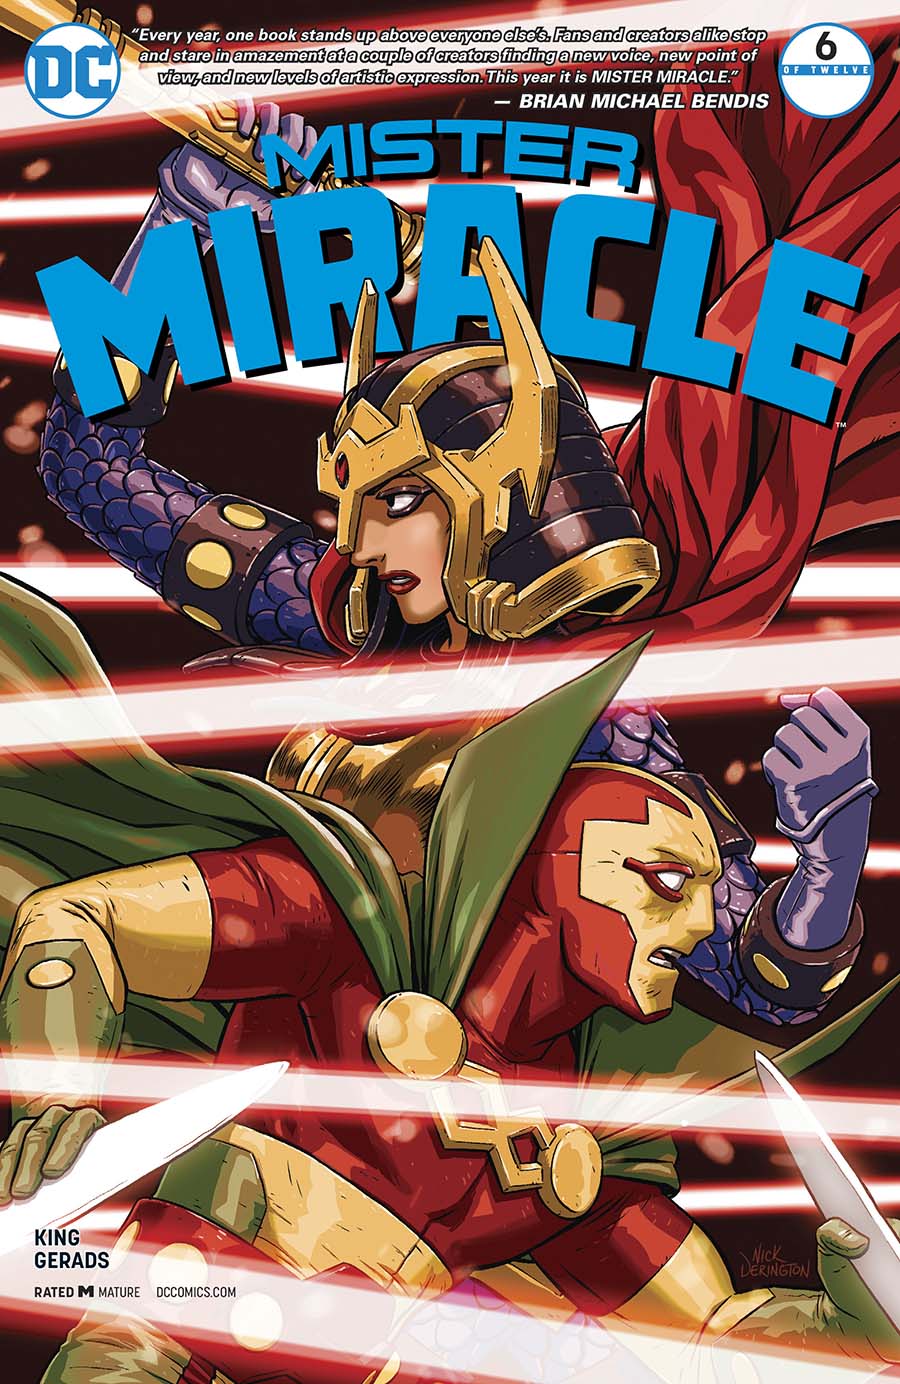 Mister Miracle Vol 4 #6 Cover A Regular Nick Derington Cover